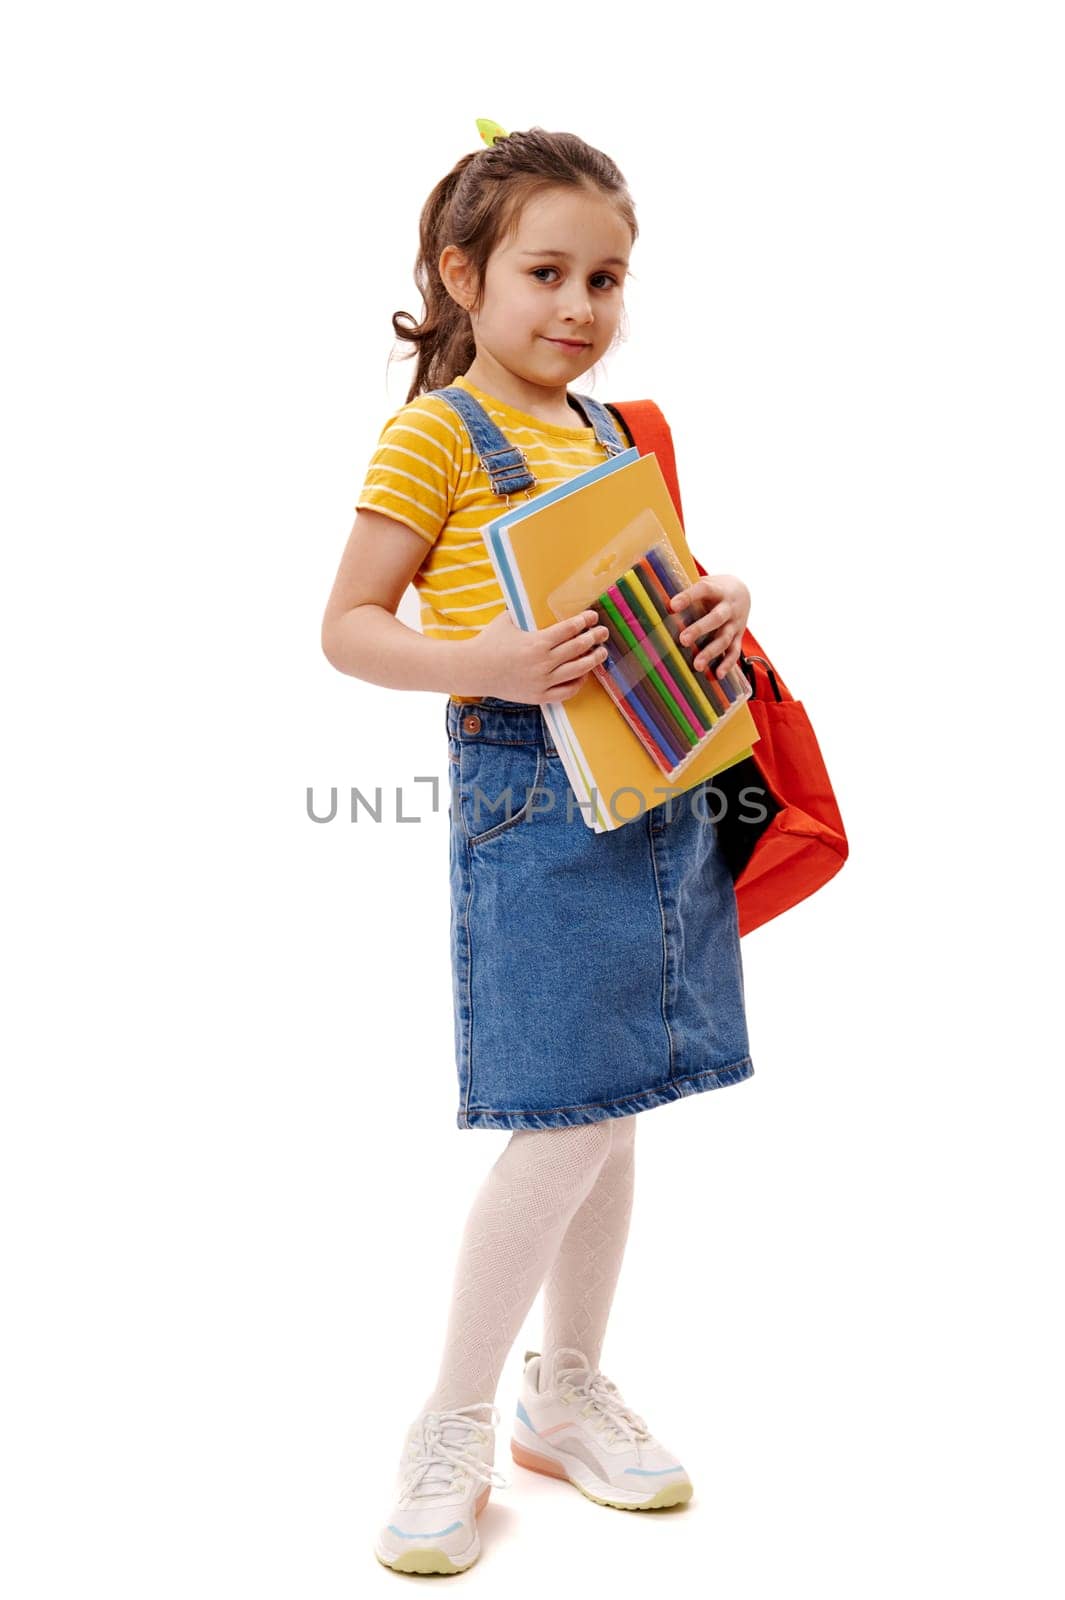 Full length portrait of 5-6 years child, smart schoolgirl in yellow t-shirt and blue denim sundress, carrying backpack and school supplies, smiling cutely looking at camera, isolated white background